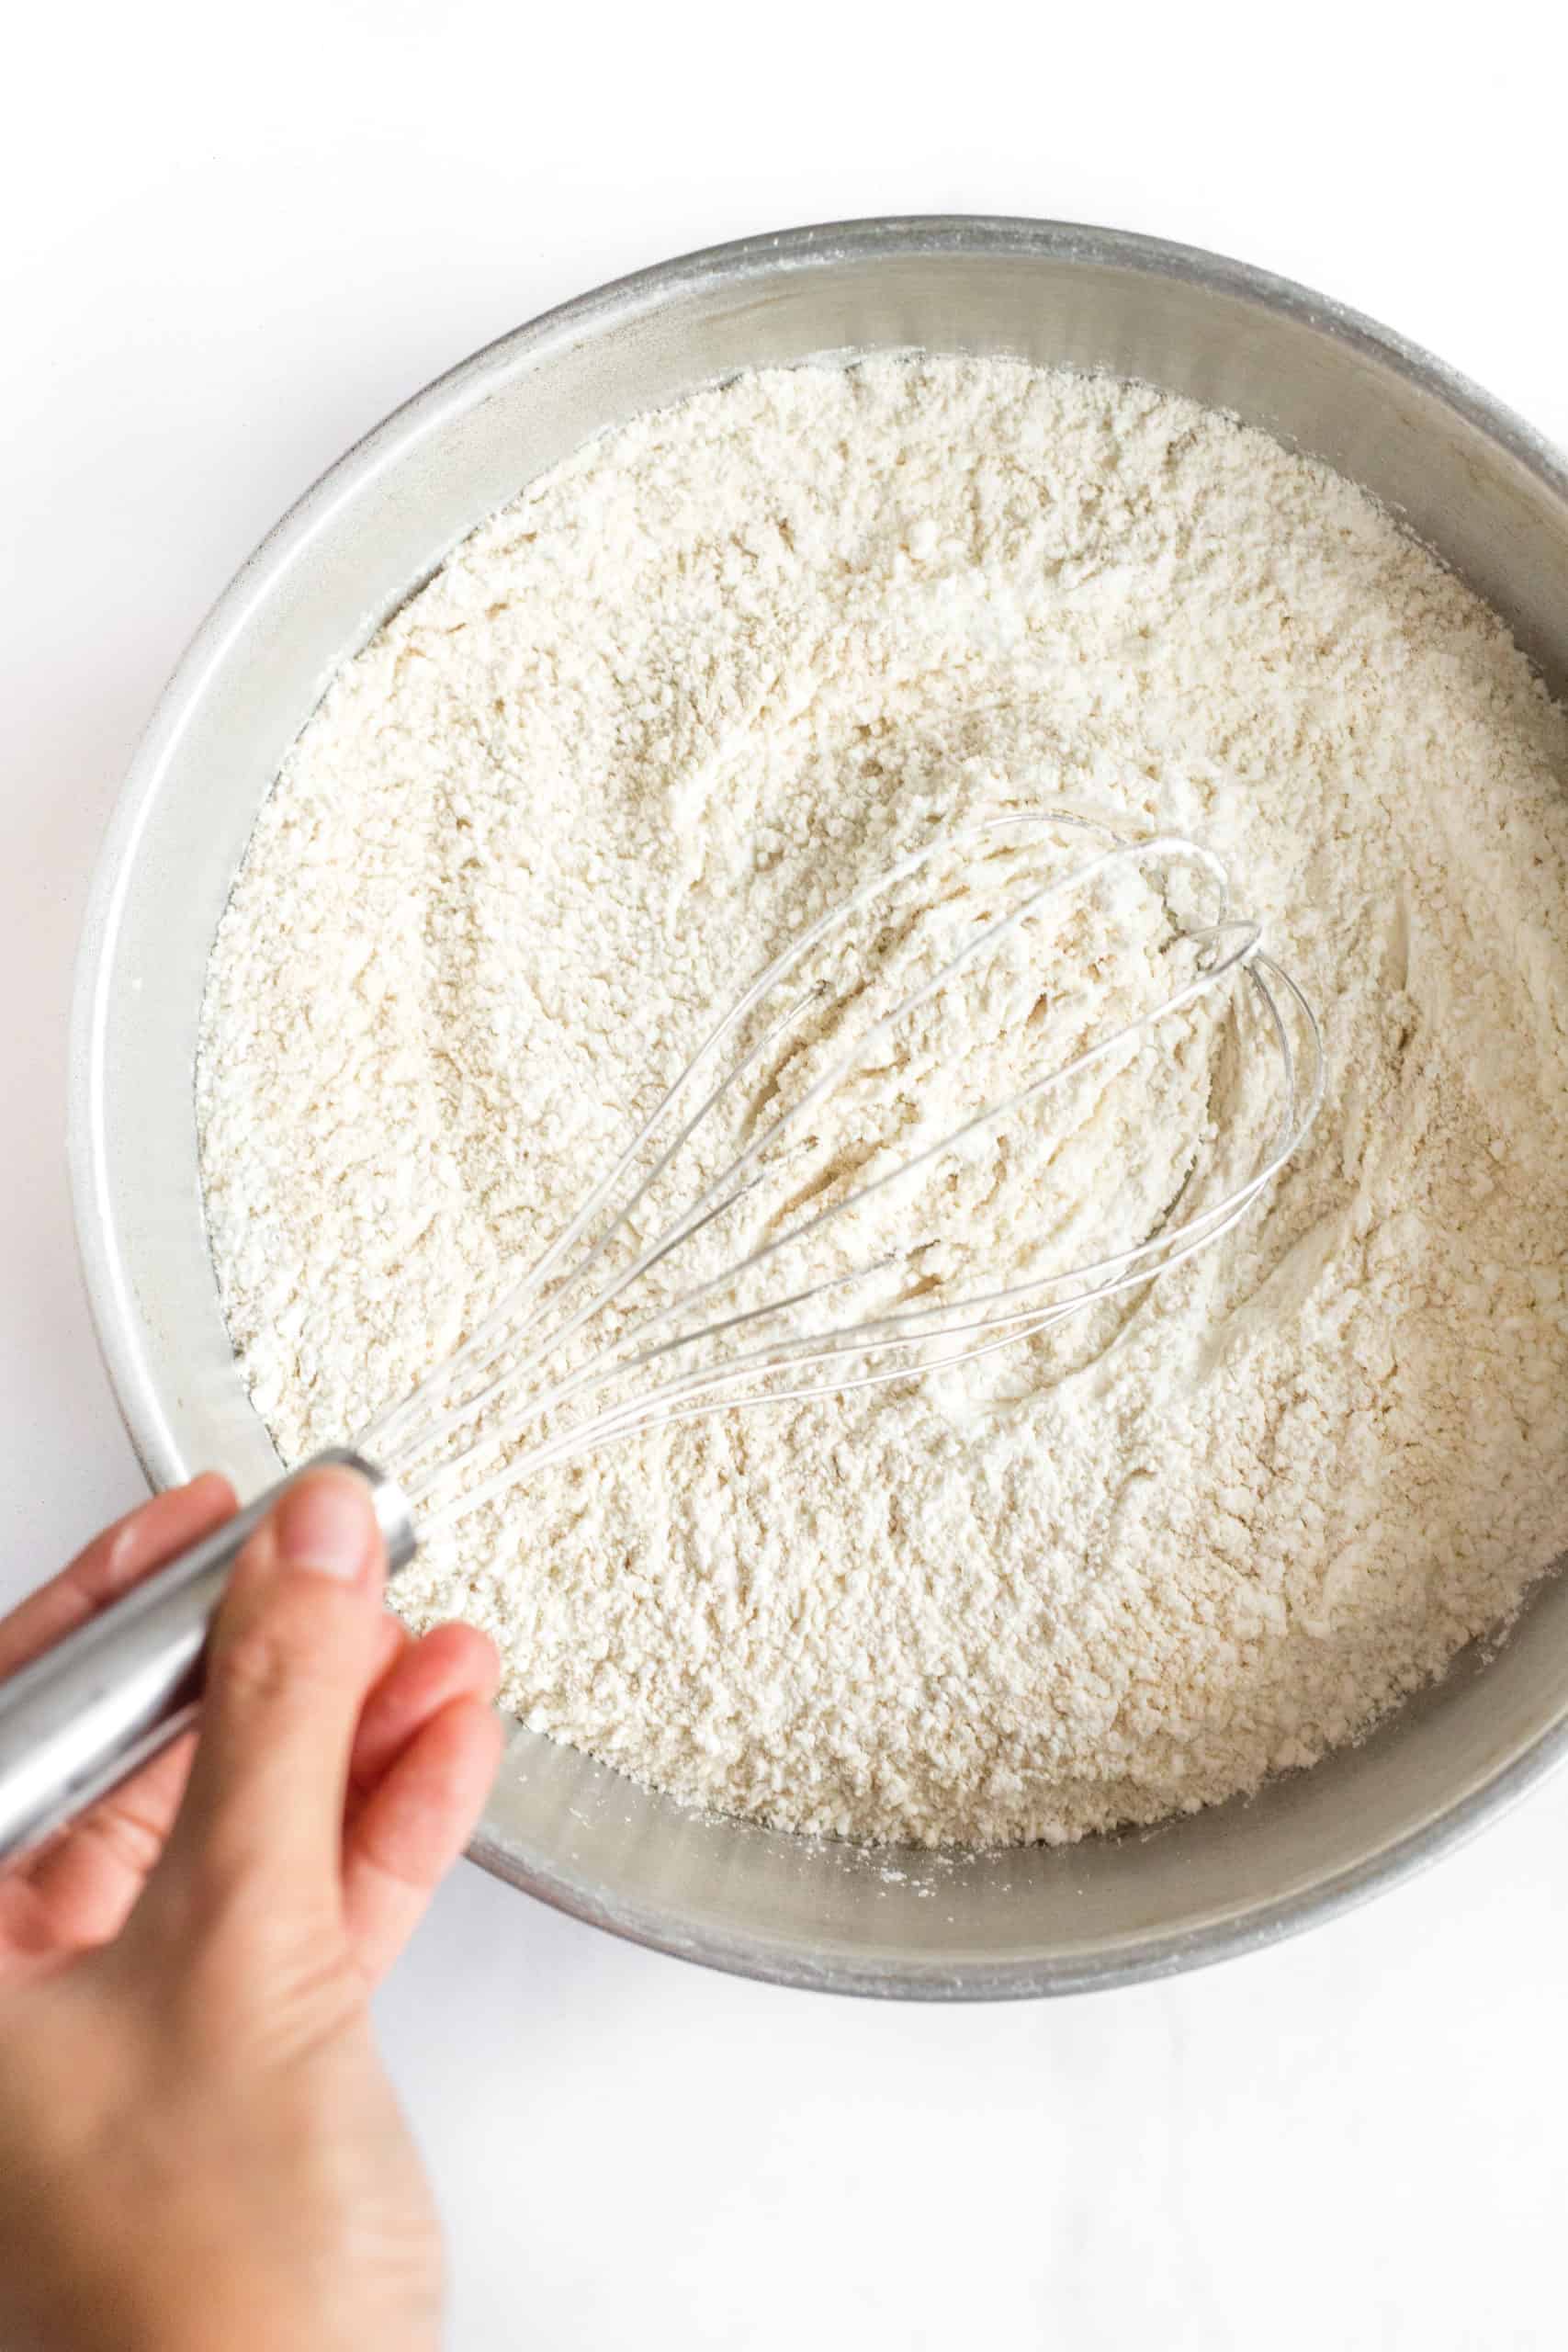 A hand whisking gluten-free all-purpose flour, brown rice flour, and salt together in a large mixing bowl.